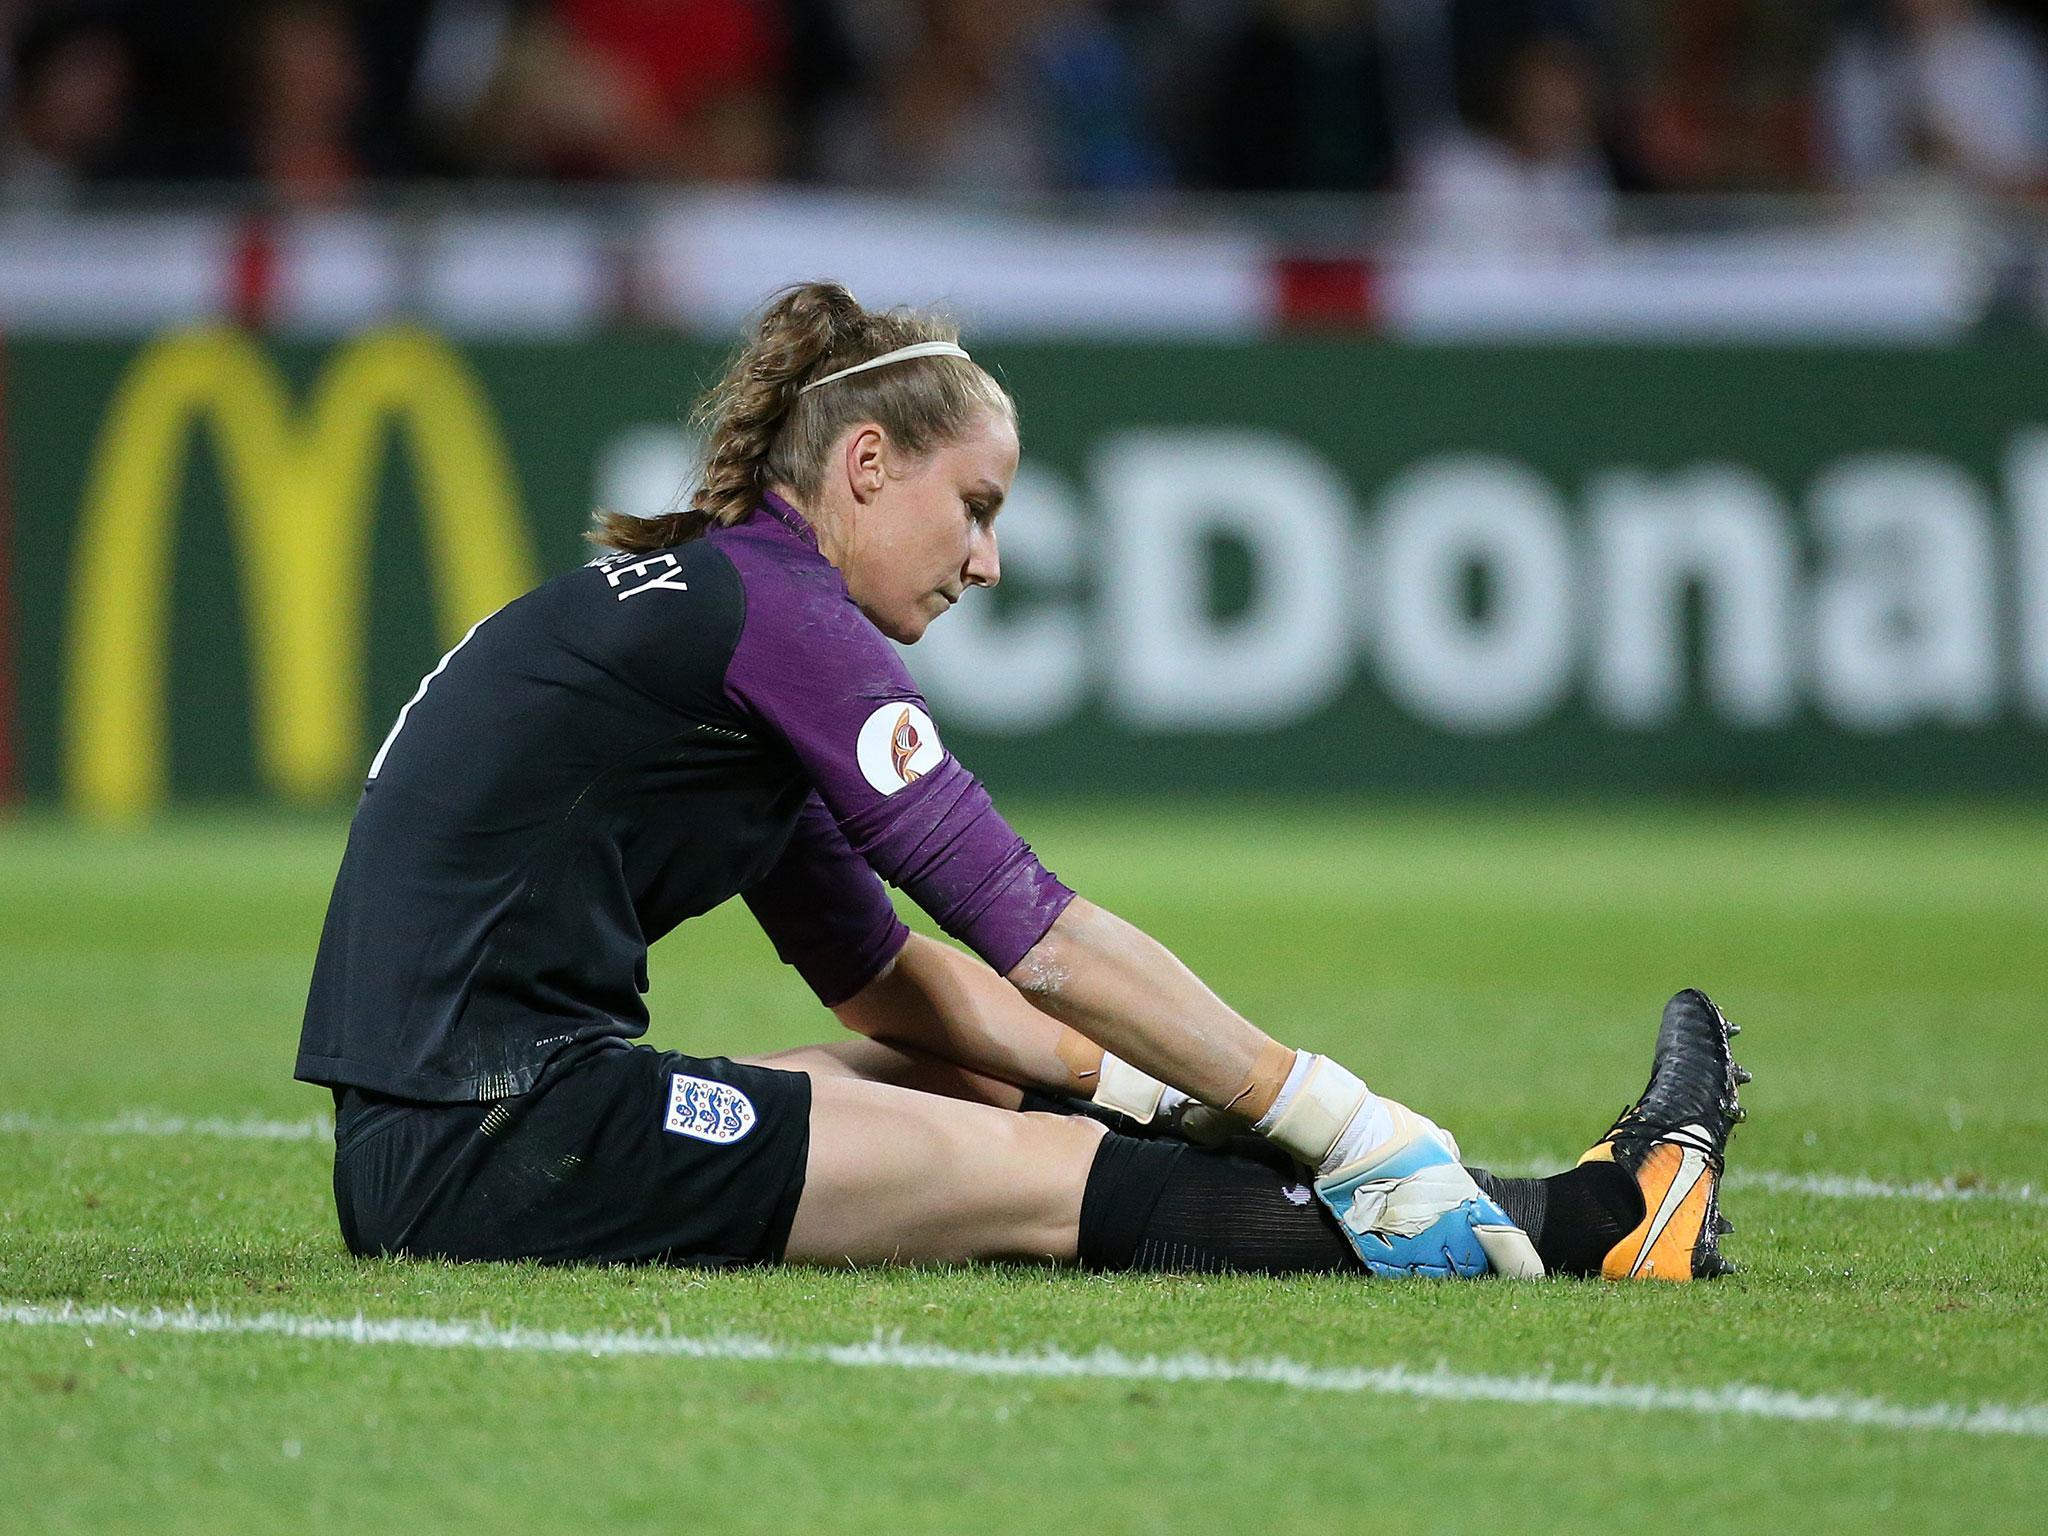 Karen Bardsley will miss the remainder of the tournament